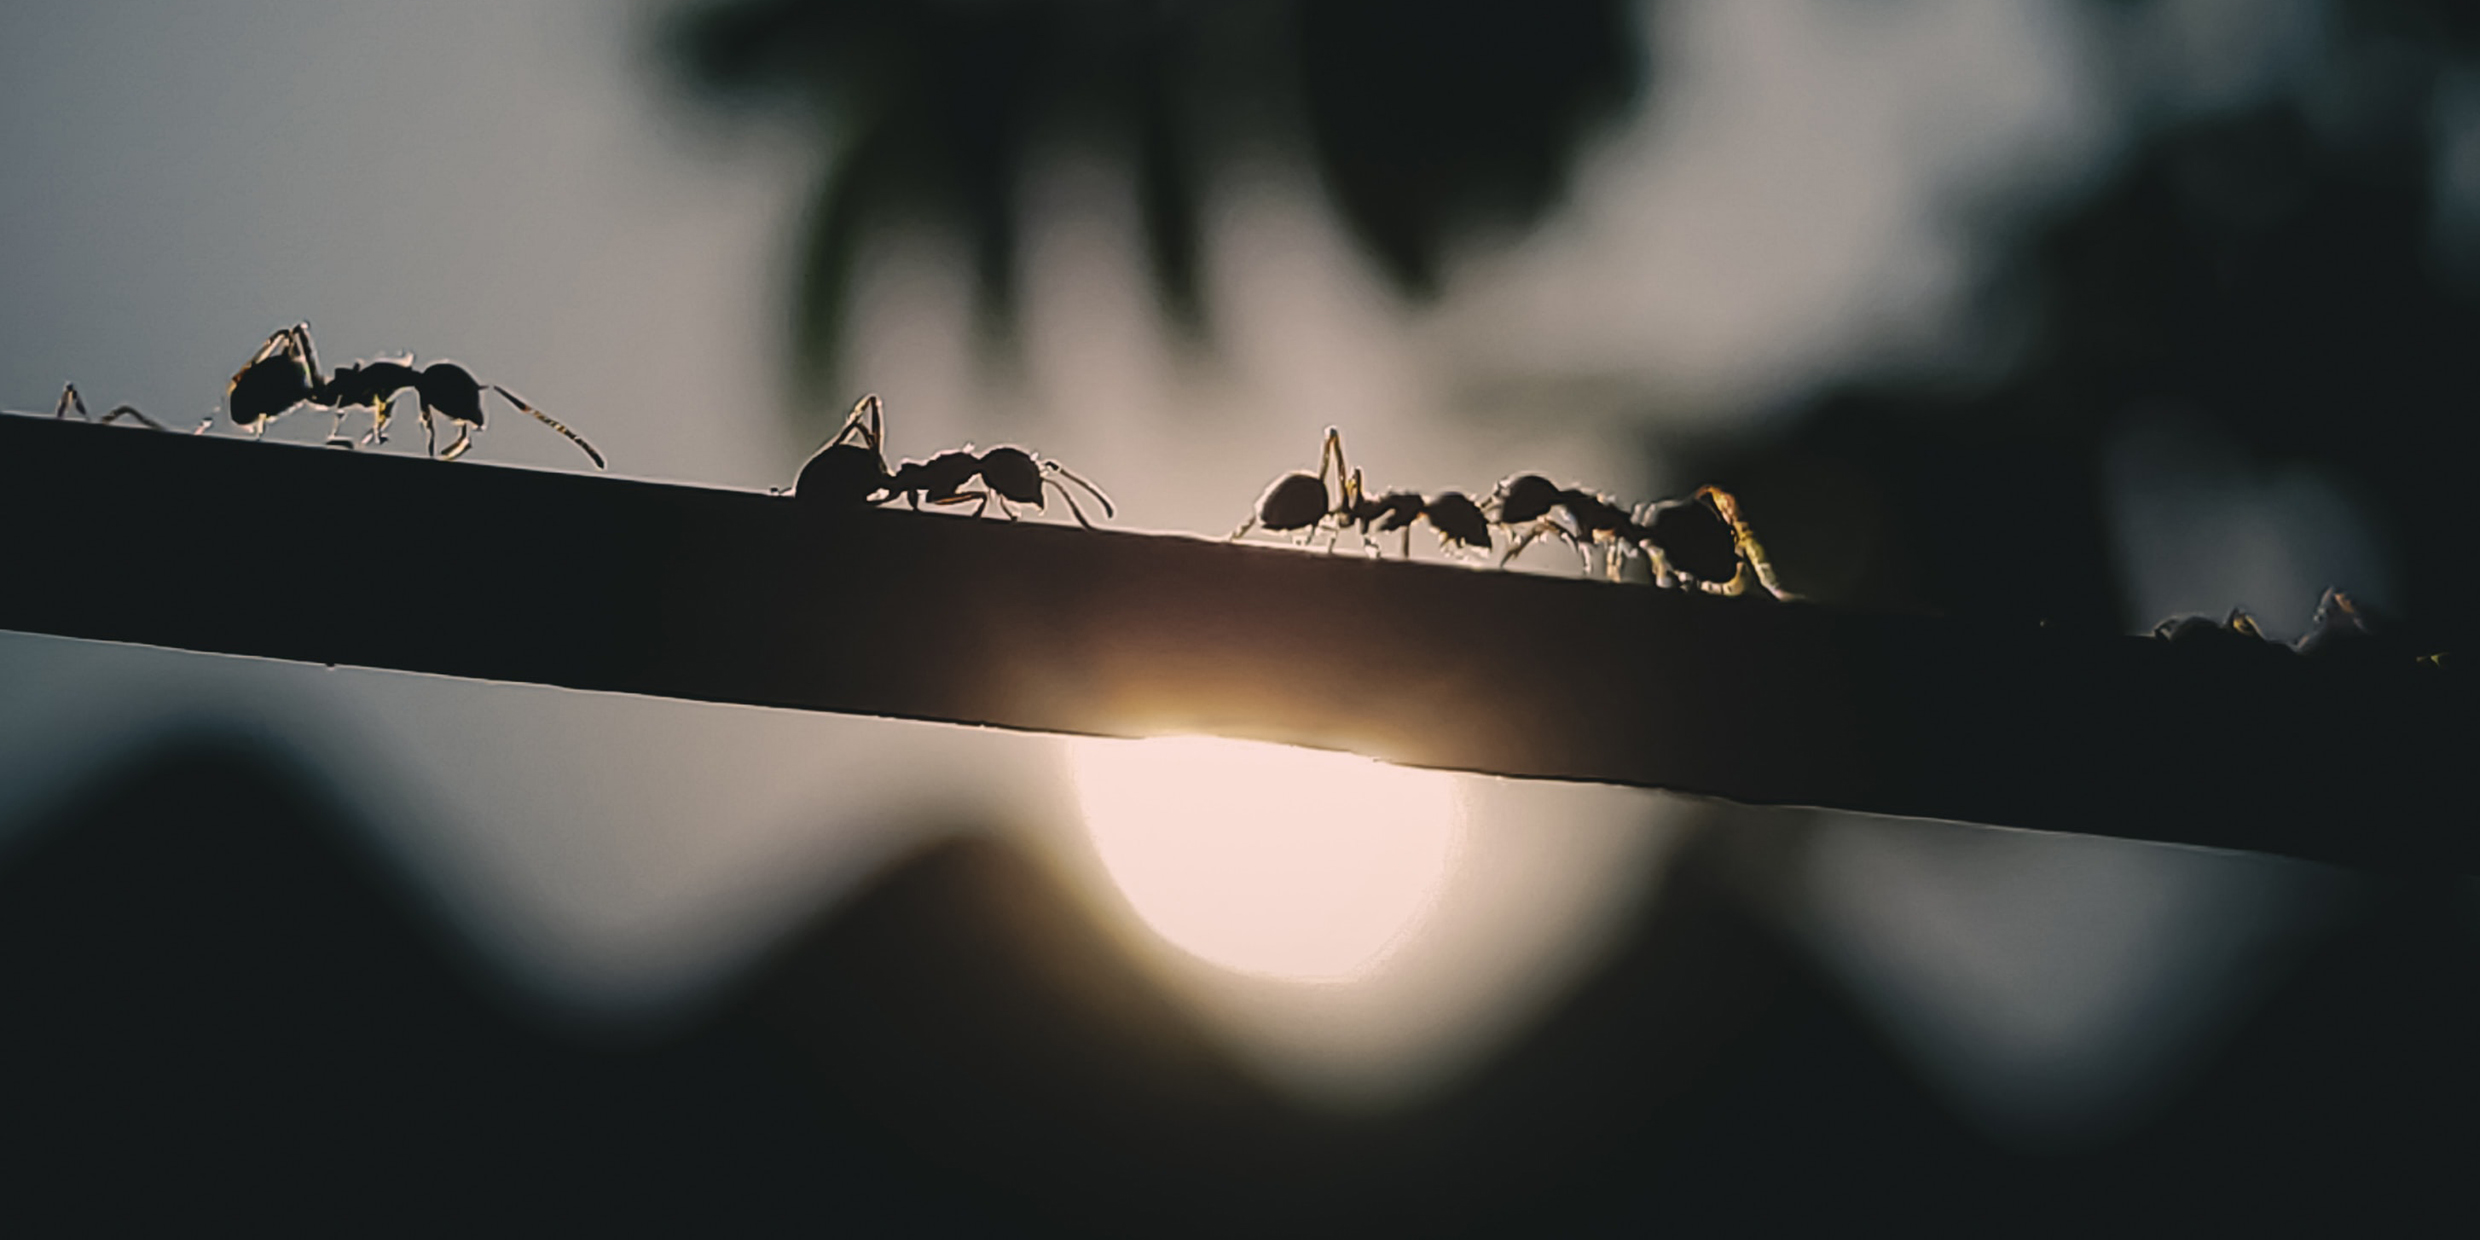 Dining on energy at the ants’ table